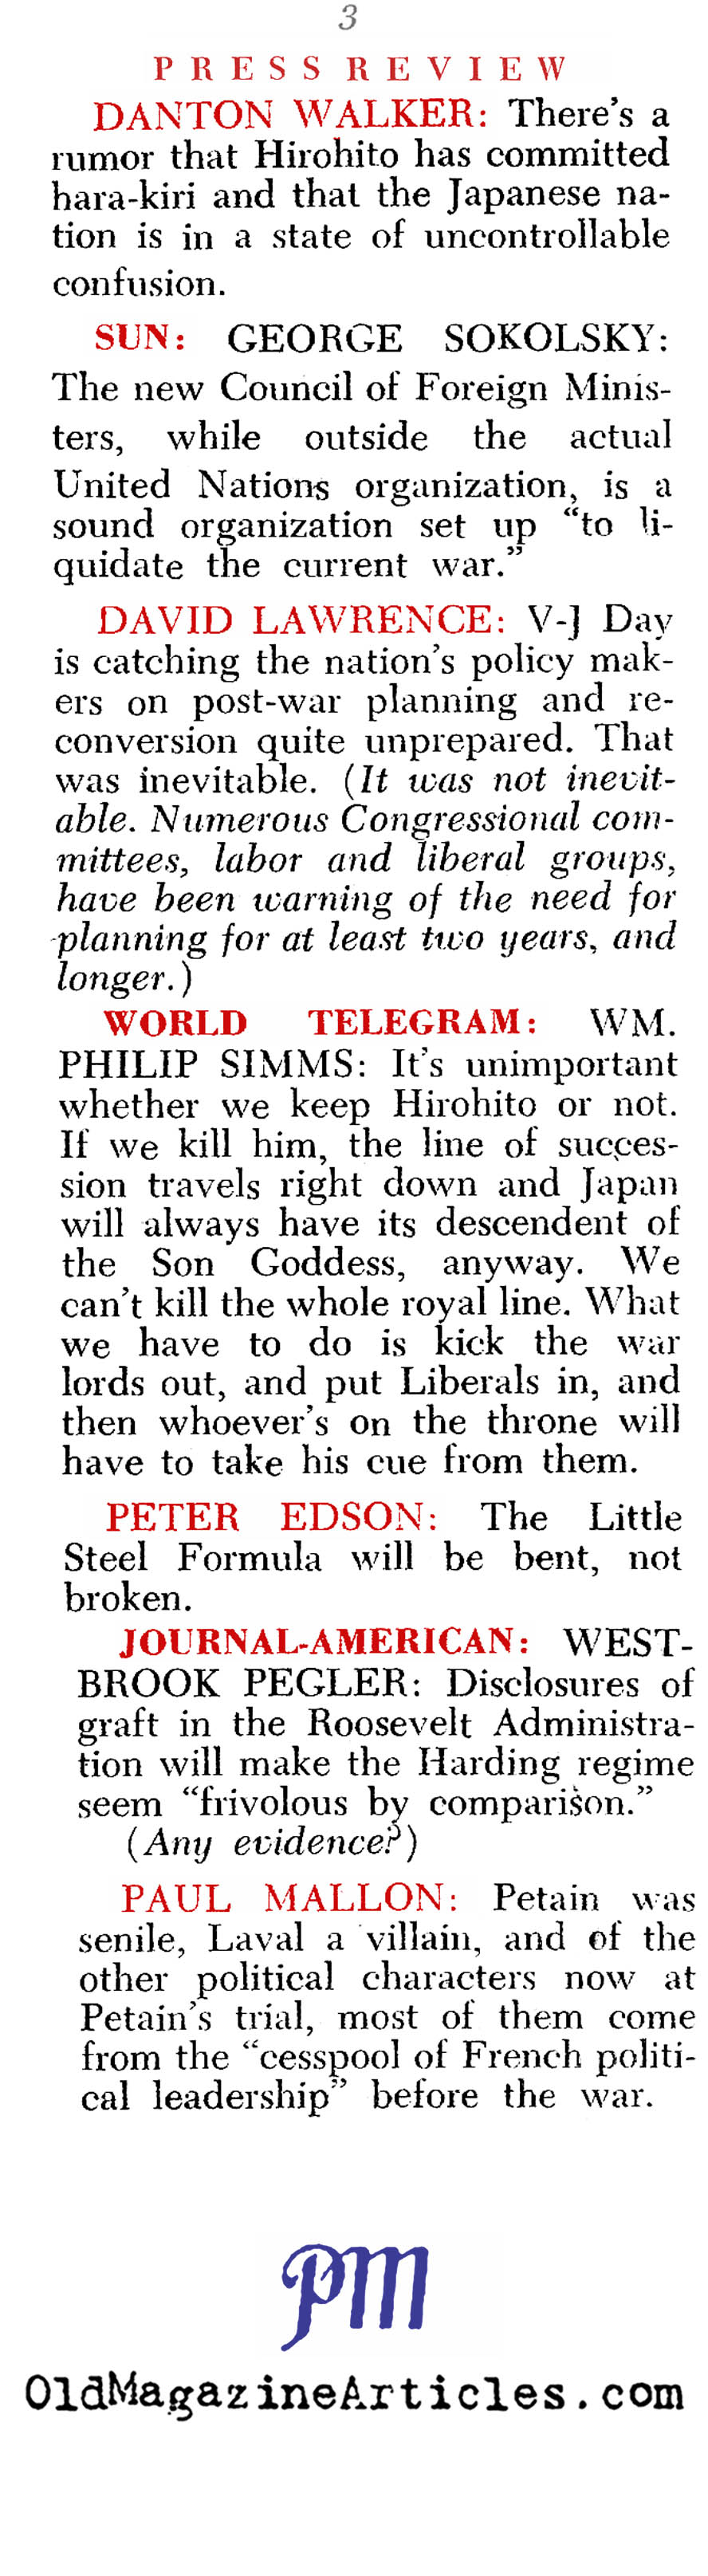 Press Reviews from Coast to Coast (PM Tabloid,1945)